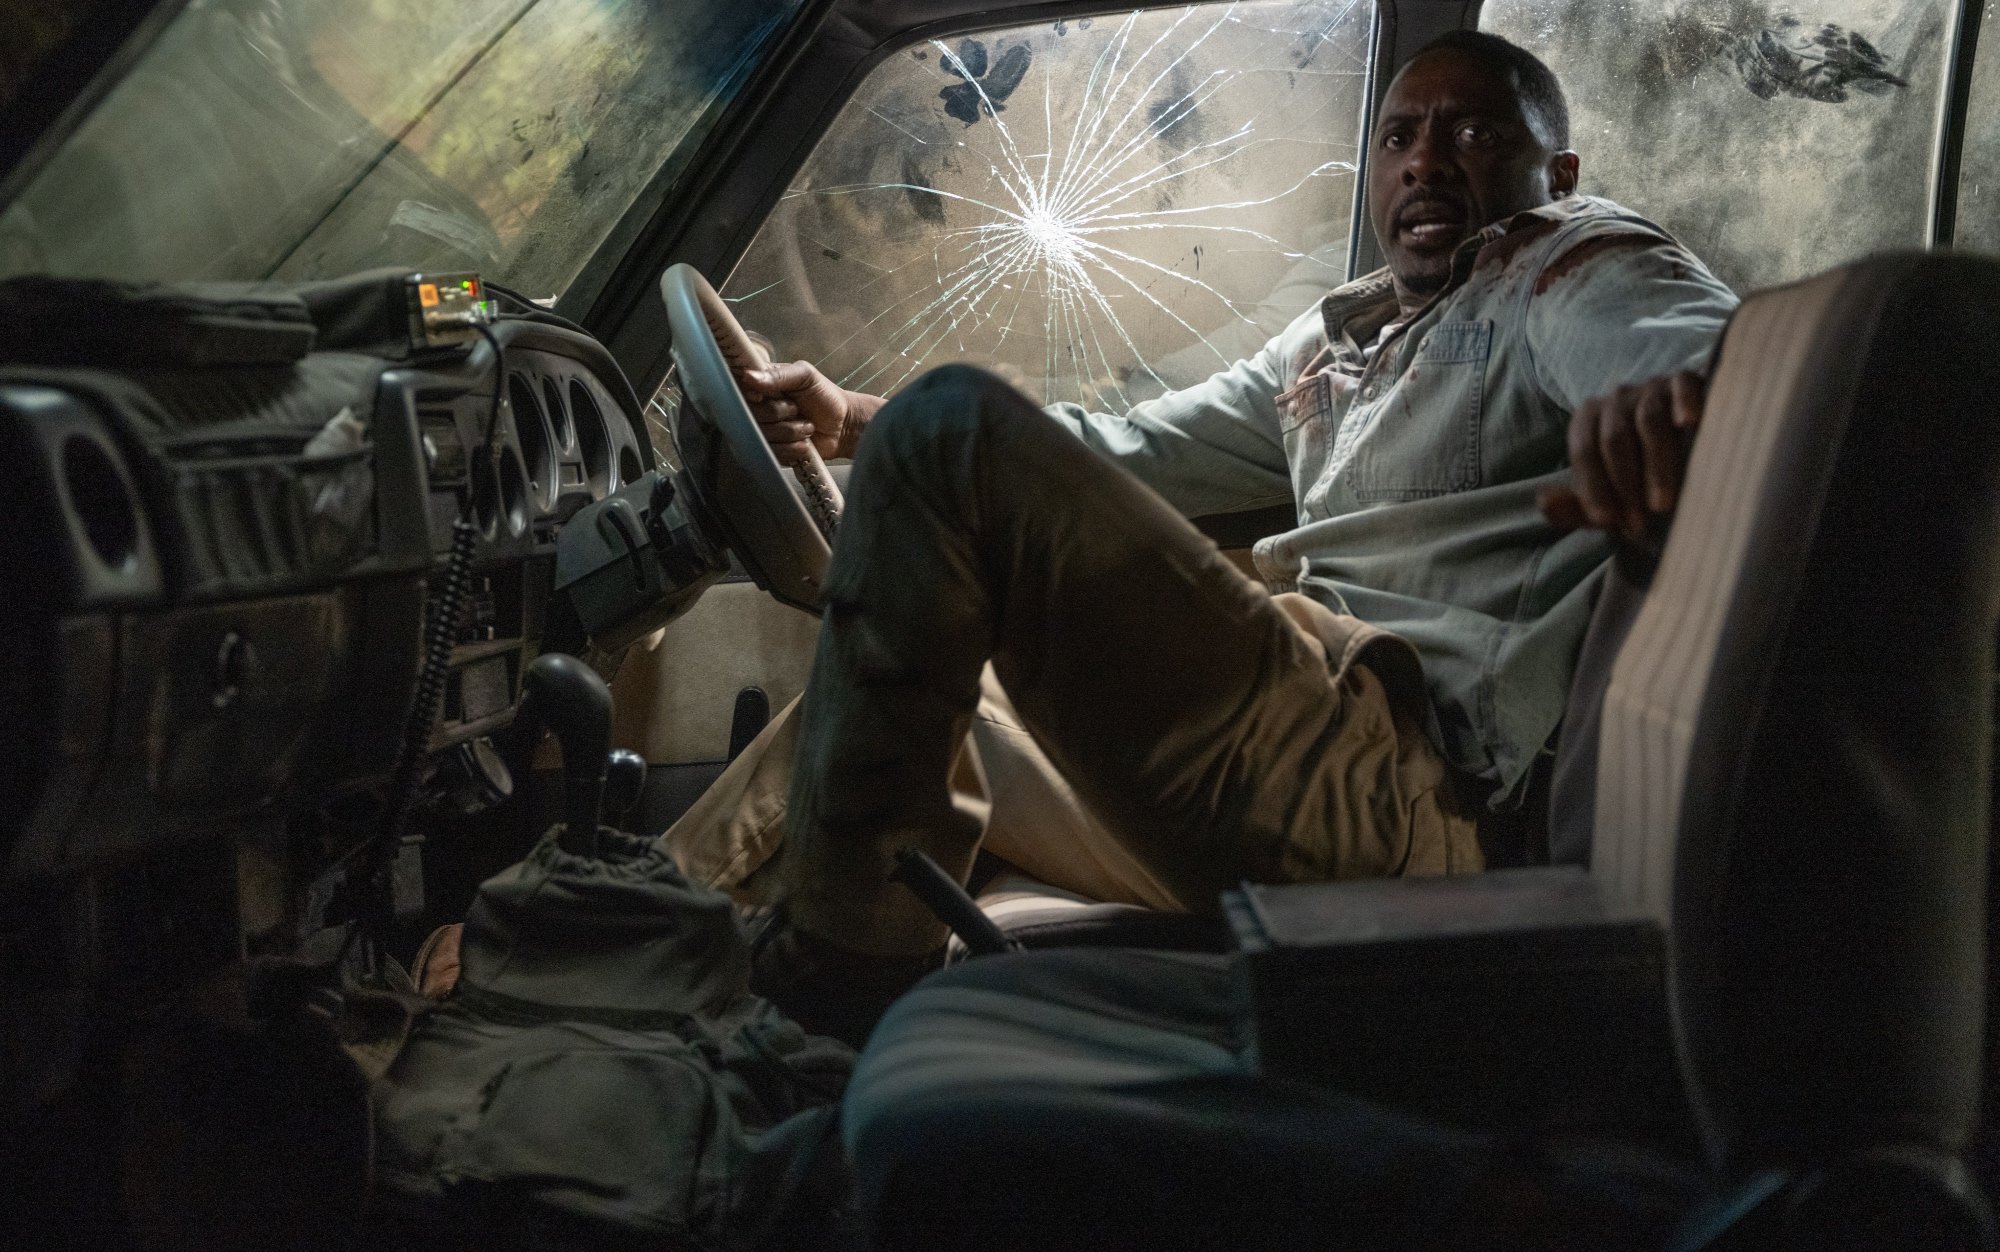 'Beast' movie starring Idris Elba as Dr. Nate Daniels. looking scared in a car with cracked window holding onto the wheel